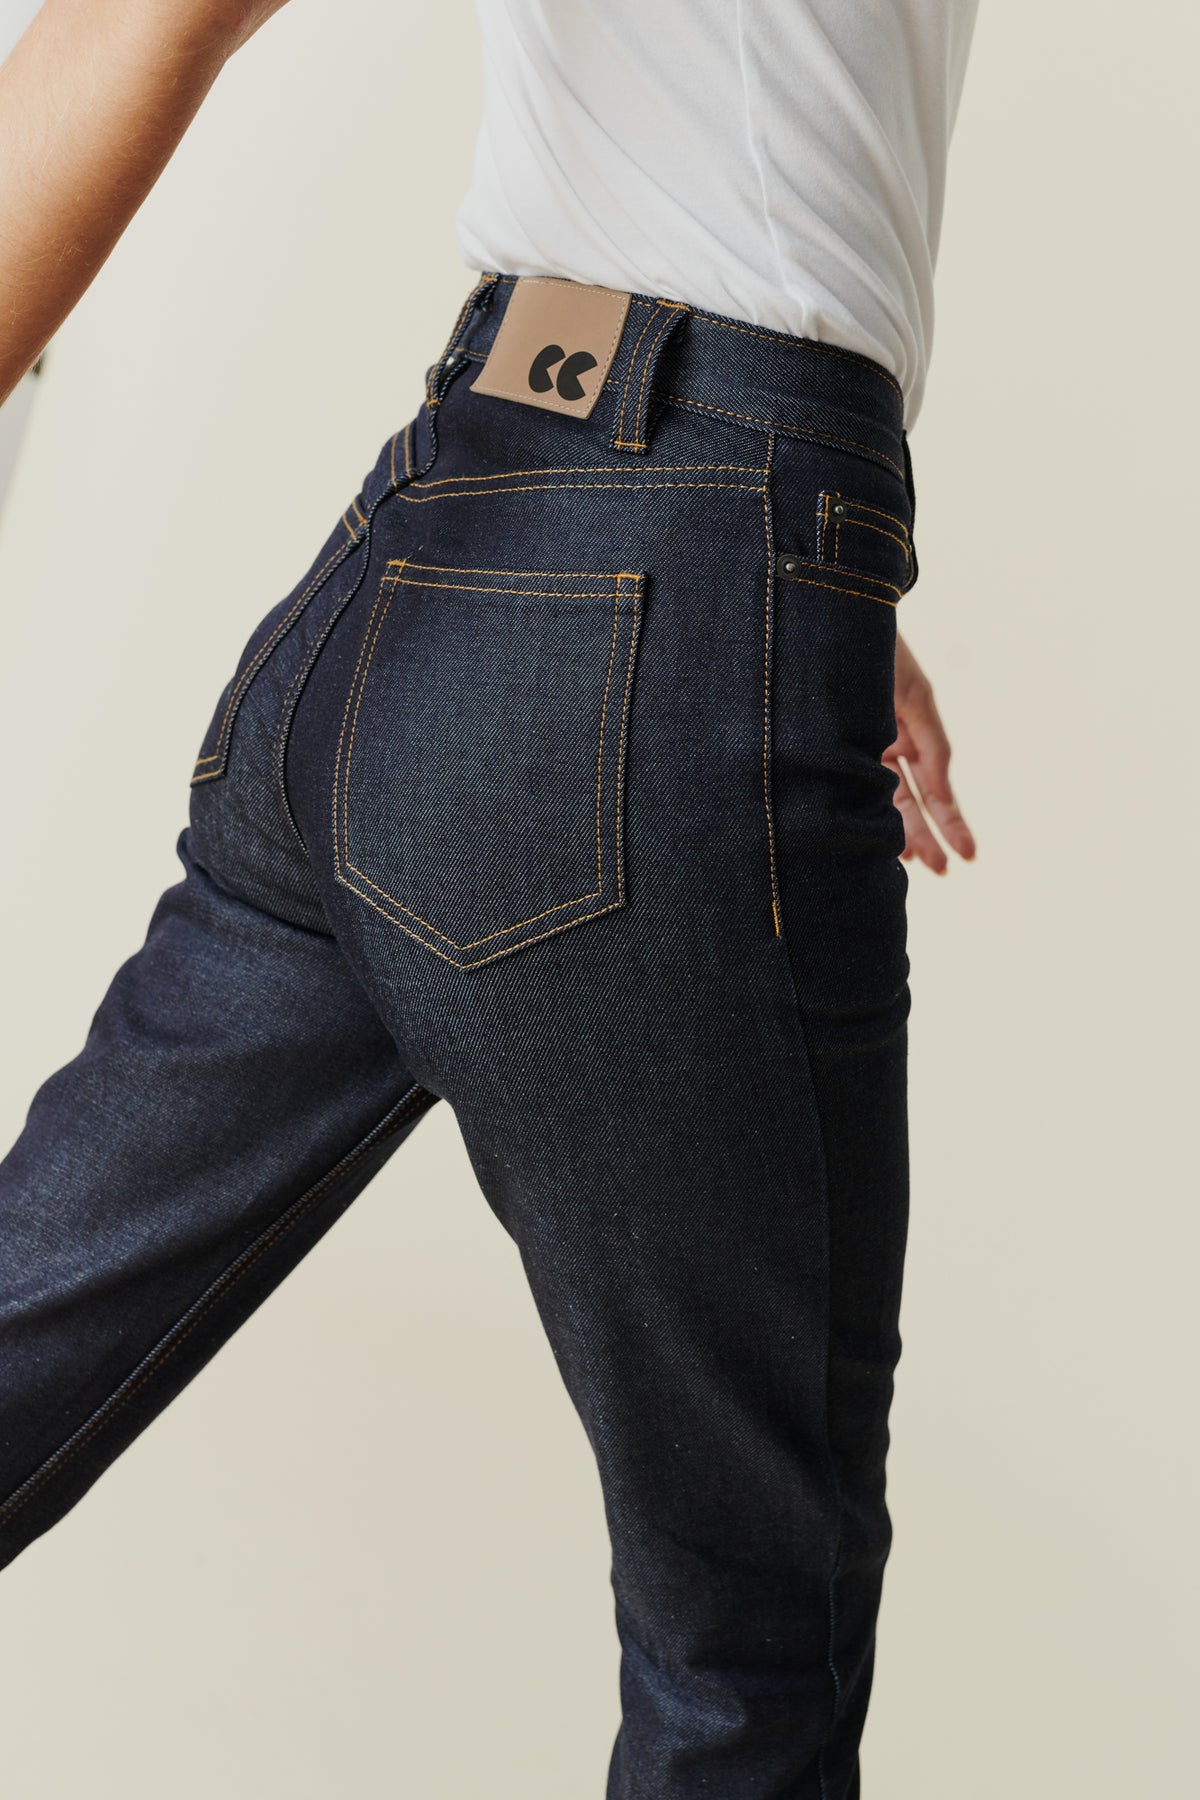 
            Back pocket and belt loop detail of female wearing straight leg high rise jeans in indigo